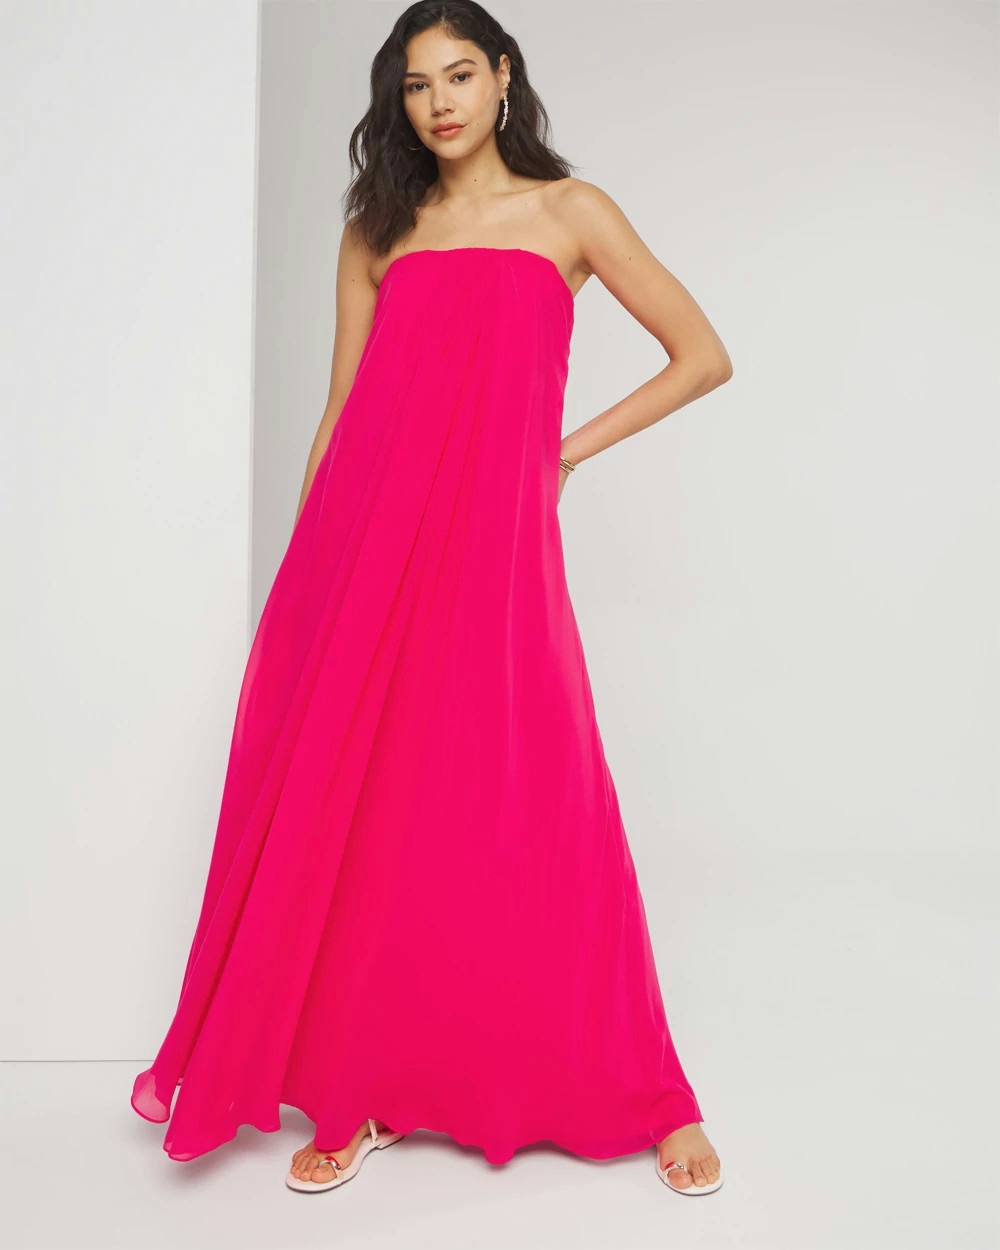 White House Black Market Strapless Drape Gown In Hot Pink